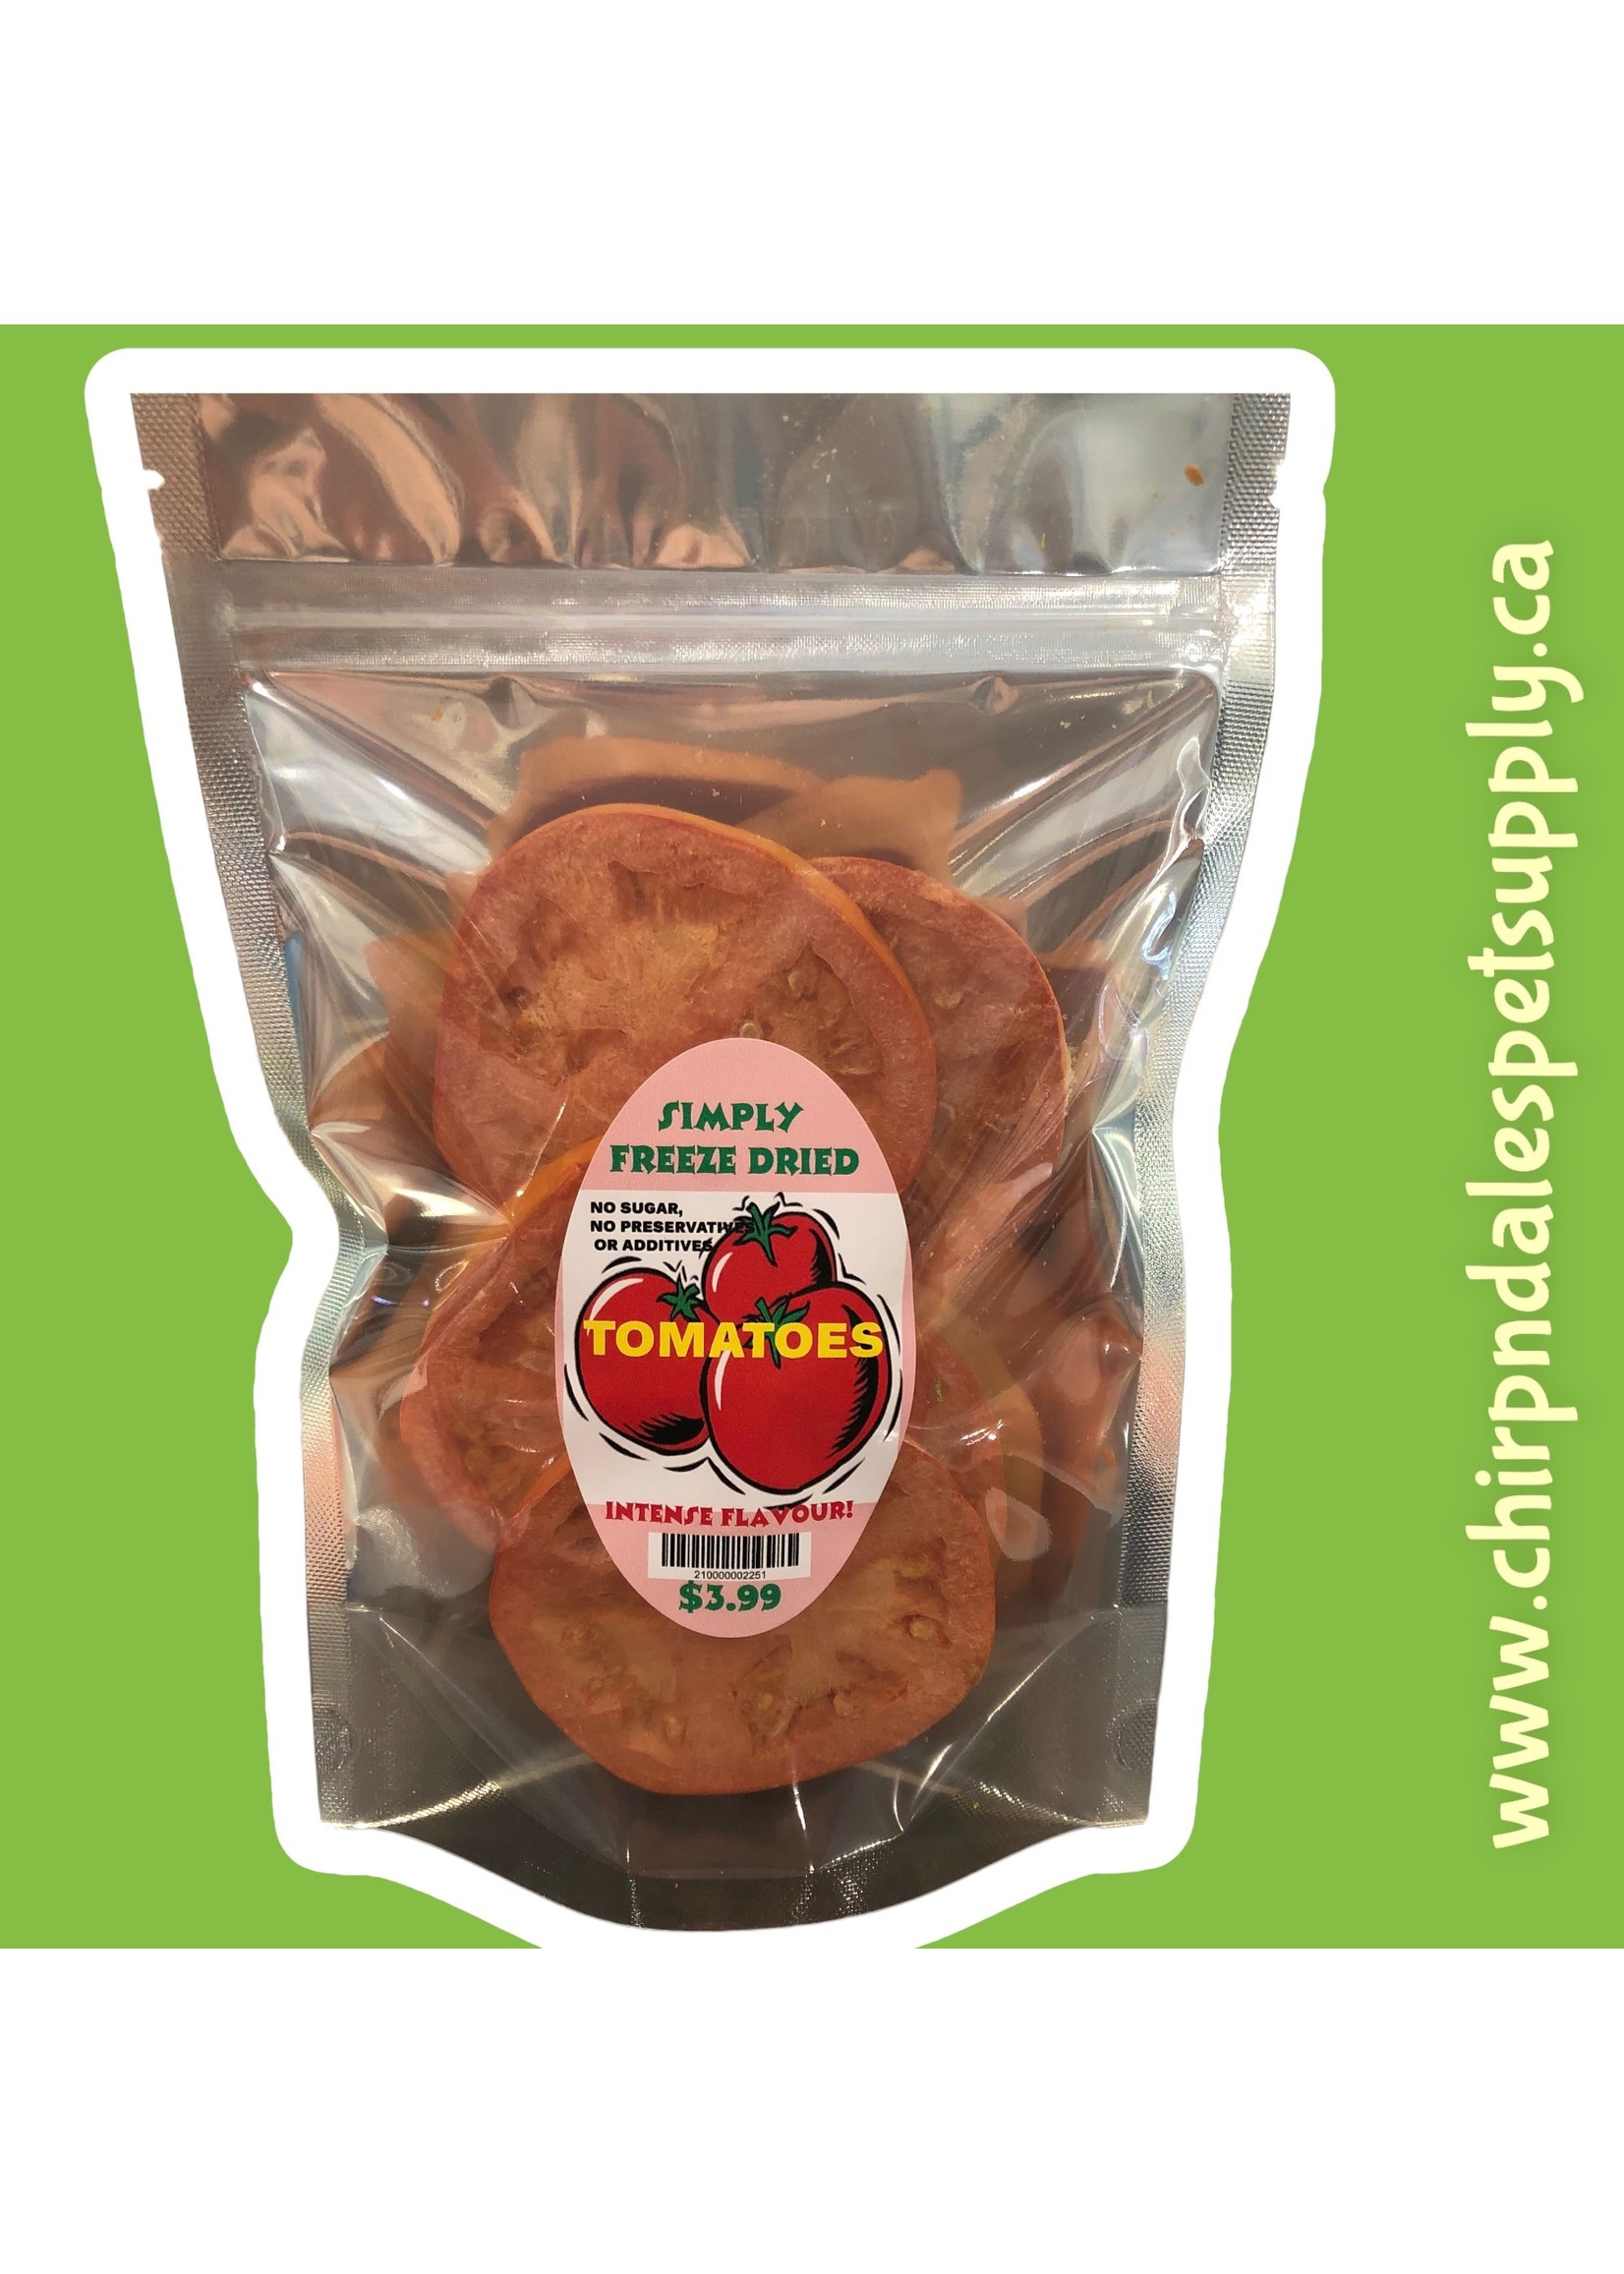 CND Freeze Dried Products SIMPLY TOMATOES FREEZE DRIED